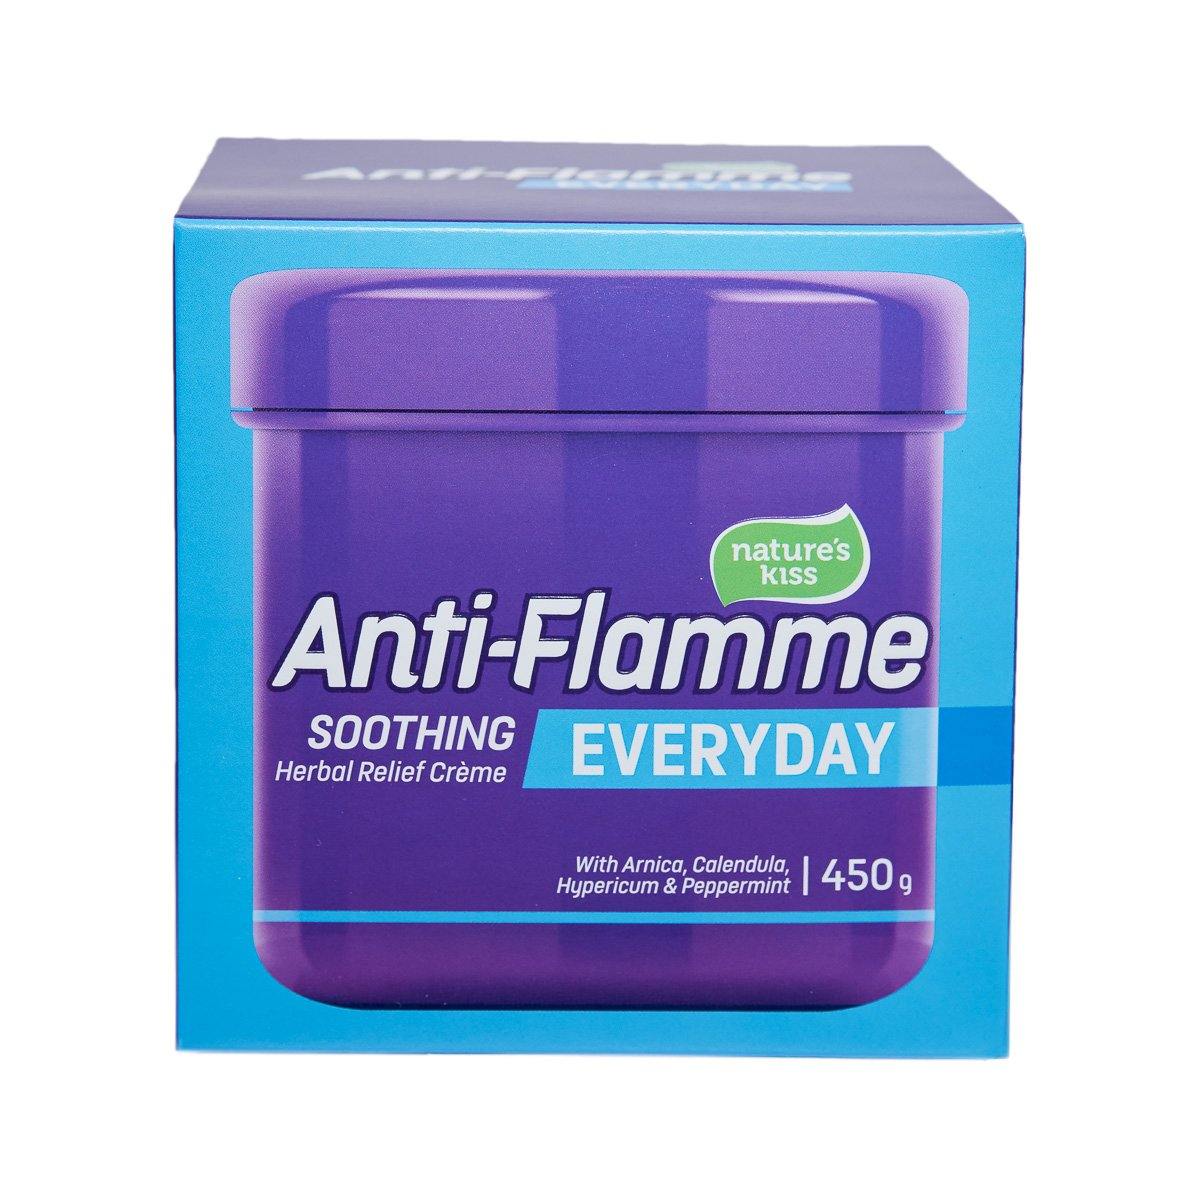 ANTI FLAMME HERBAL EVERYDAY RELIEF CREME 450G - DominionRoadPharmacy